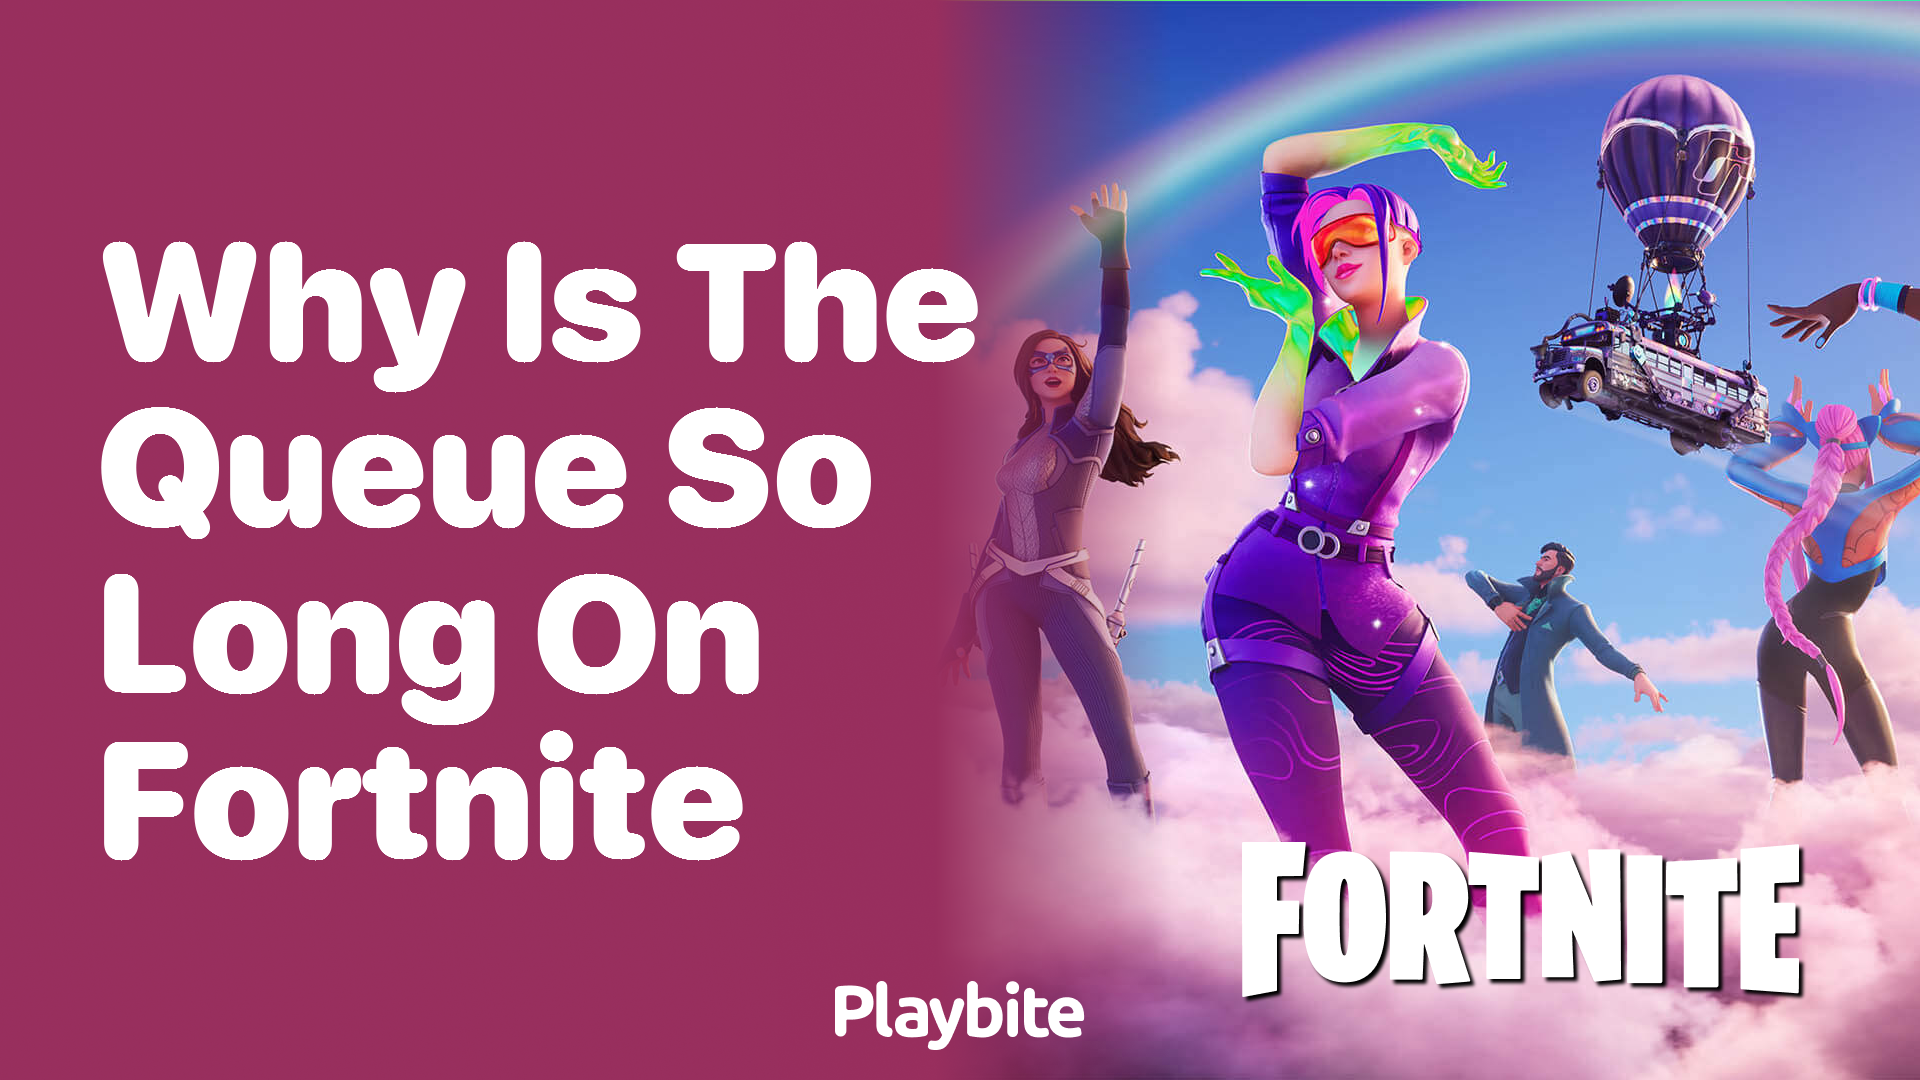 Why Is the Queue So Long on Fortnite?